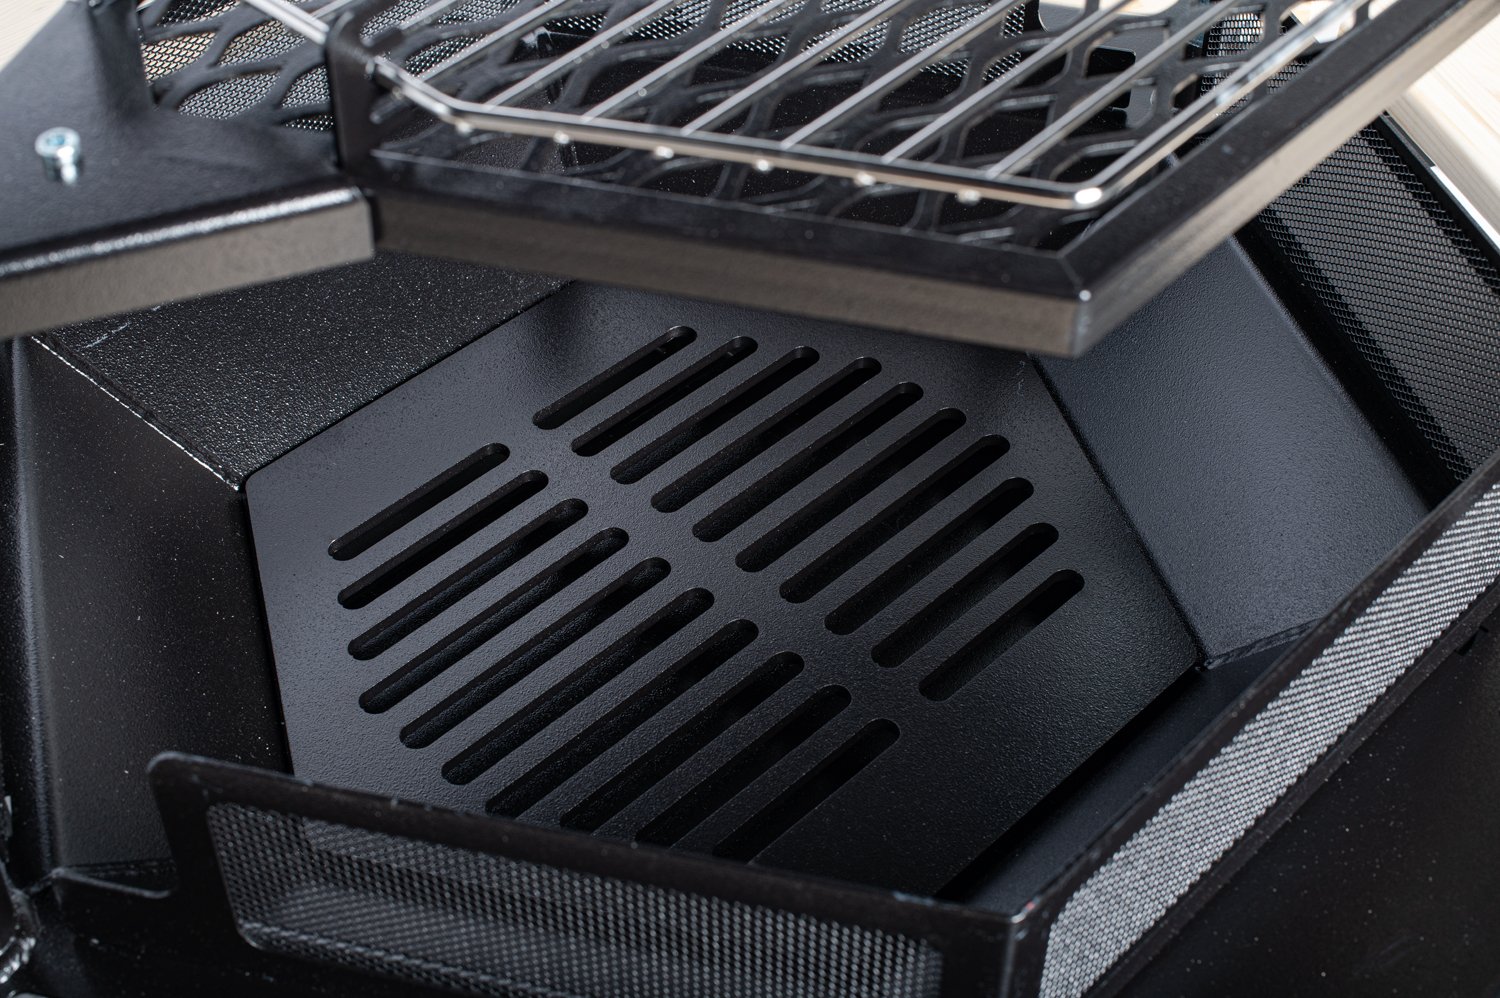 M6 Kota Grill with Arched Chrome Grill Hanger thermaliving 